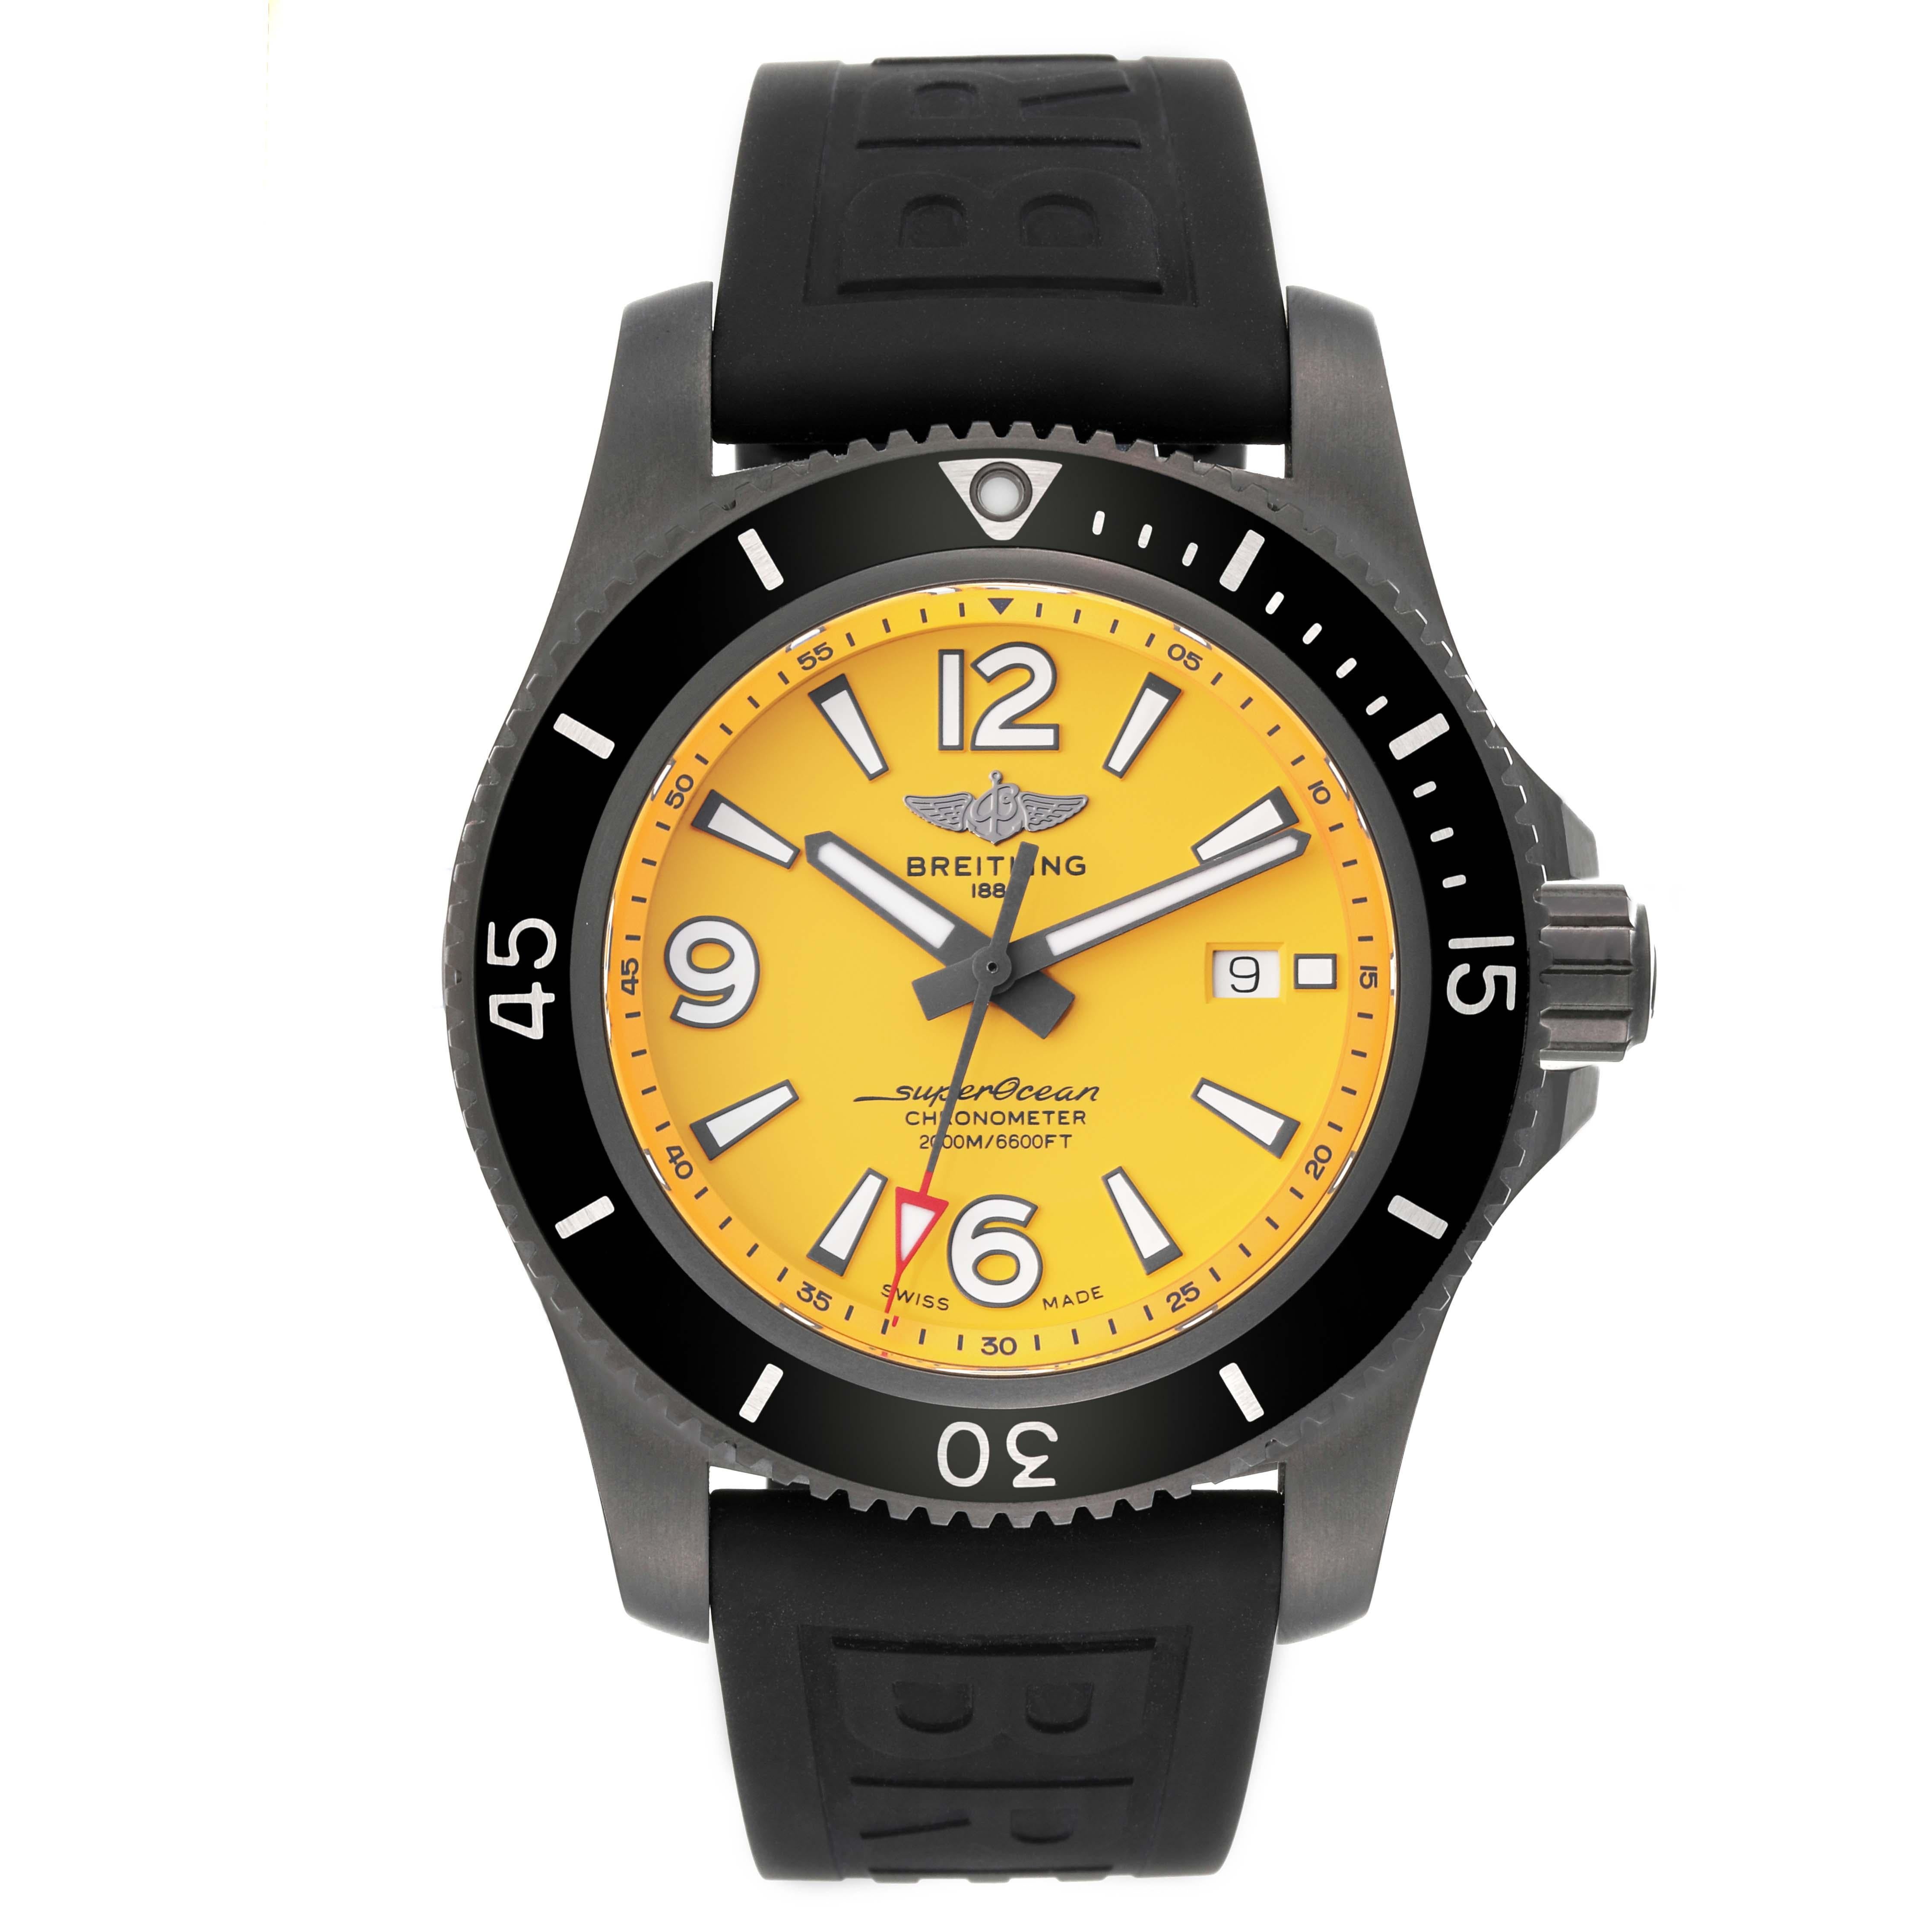 Breitling Superocean 46 Yellow Dial DLC Steel Mens Watch M17368 Box Card. Automatic self-winding movement. DLC coated stainless steel case 46.0 mm in diameter. Stainless steel screwed-down crown. Black DLC coated stainless steel unidirectional